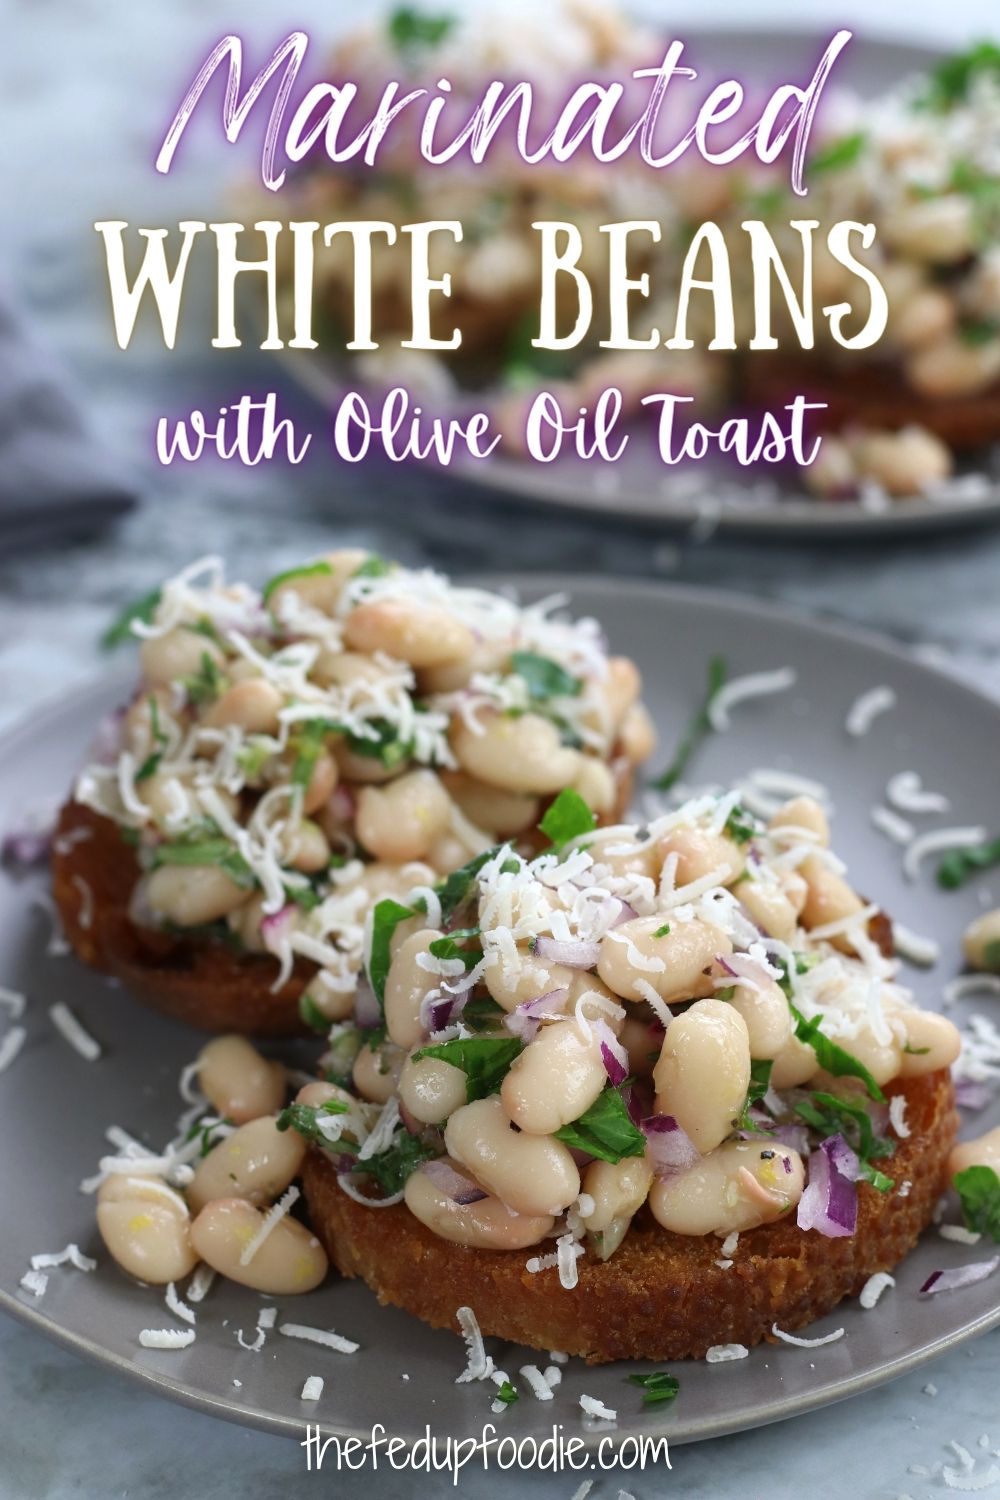 Marinated White Beans recipe is a quick, easy and incredibly flavorful meal or appetizer that is part of the Mediterranean diet. This recipe can be served many ways. However, it is beyond amazing on olive oil toast with freshly grated Parmigiano Reggiano (aka real Italian parmesan cheese). #MarinatedWhiteBeans #MarinatedWhiteBeanSalad #MarinatedWhiteBeansWithOliveOilToast #CannelliniBeanSalad #WhiteBeanSaladRecipes #MarinatedWhiteBeansRecipe